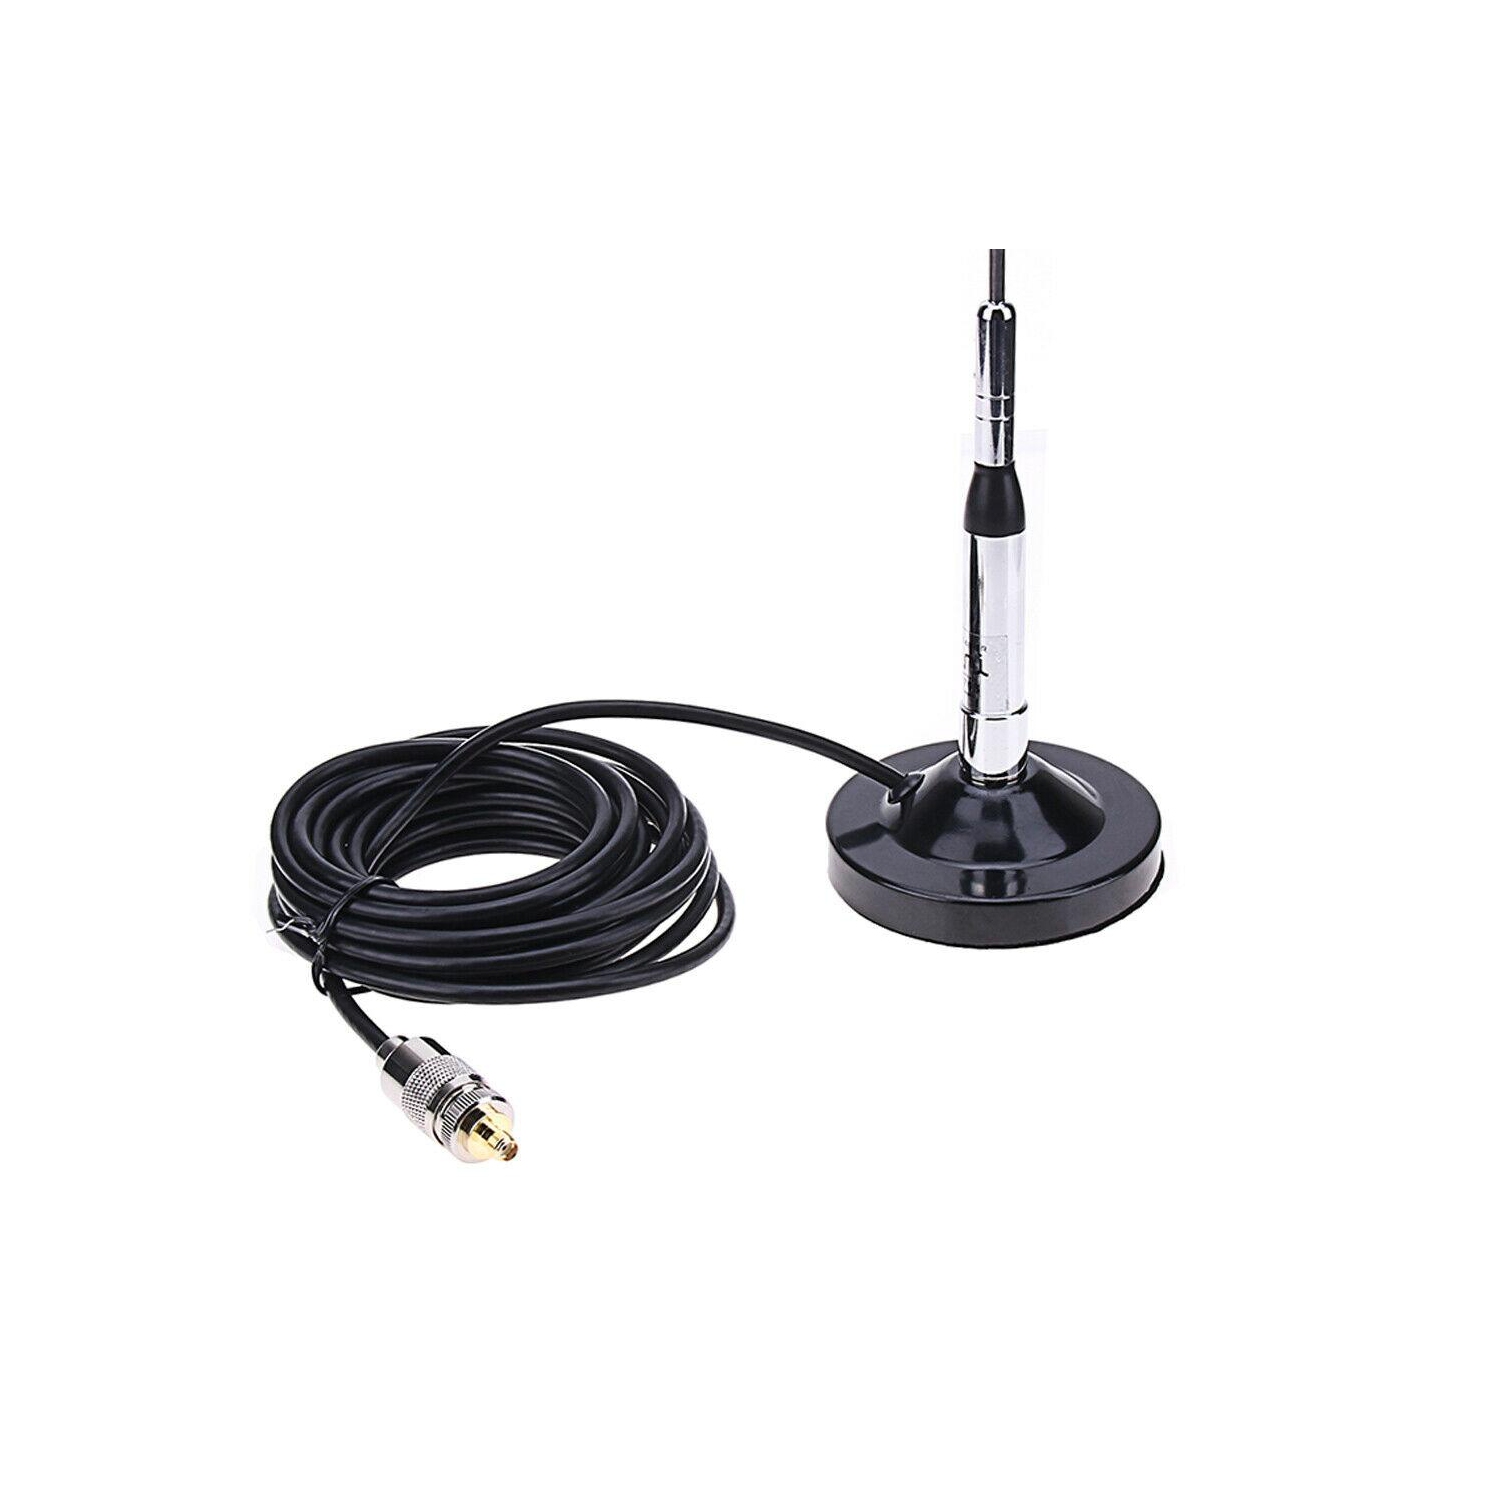 770S Antenna+Magnetic Mount Base UHF-M Cable+Connector for Car Mobile Radio